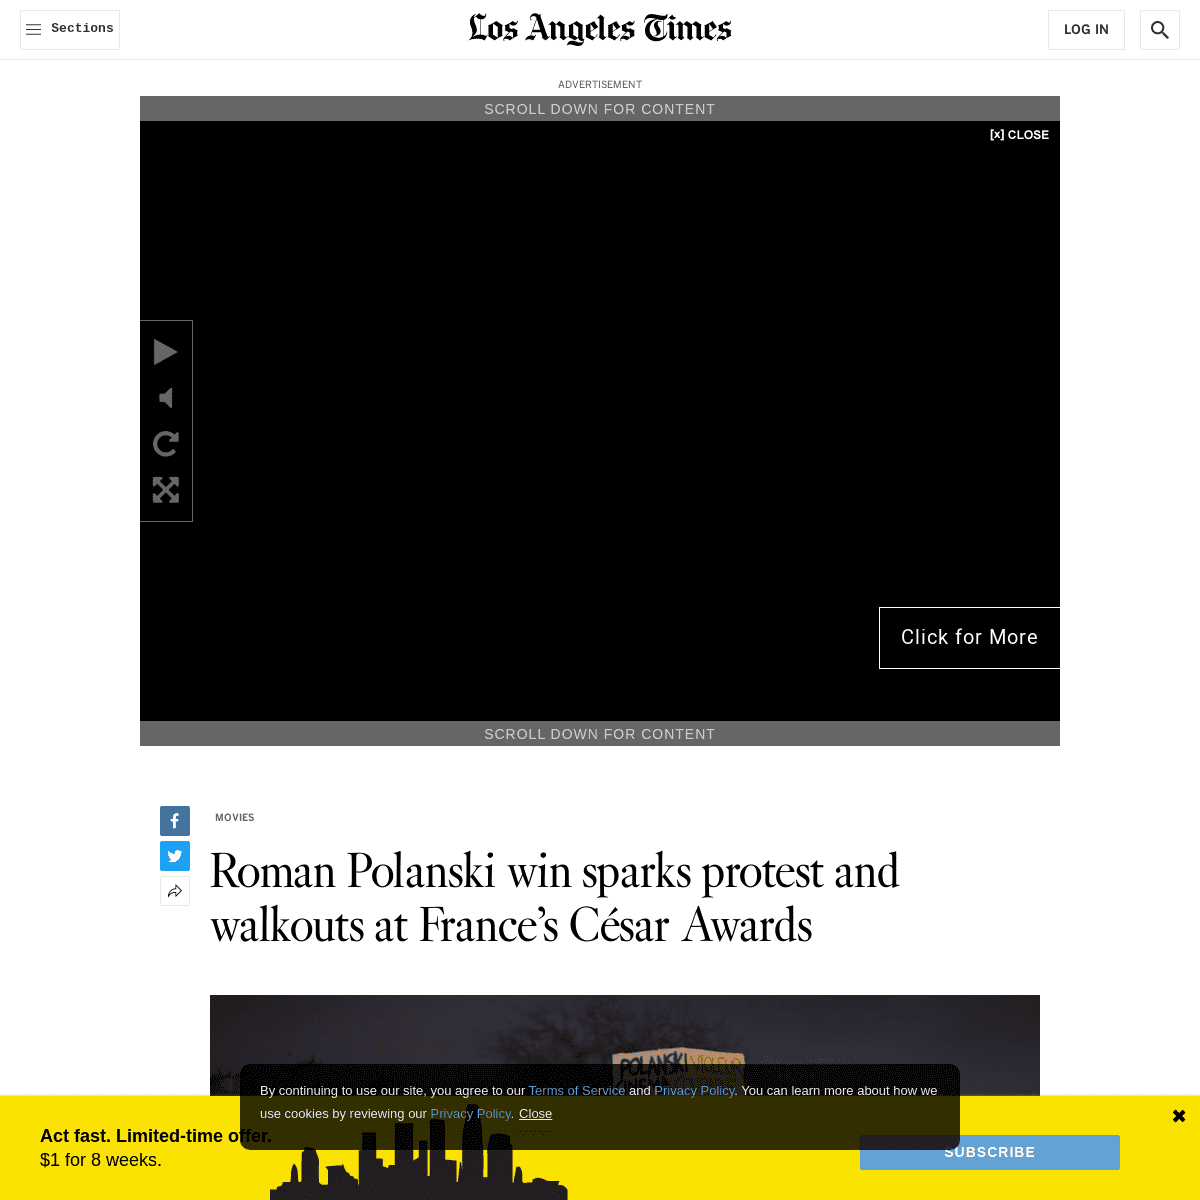 A complete backup of www.latimes.com/entertainment-arts/movies/story/2020-02-29/polanski-win-cesar-awards-protest-actress-walkou